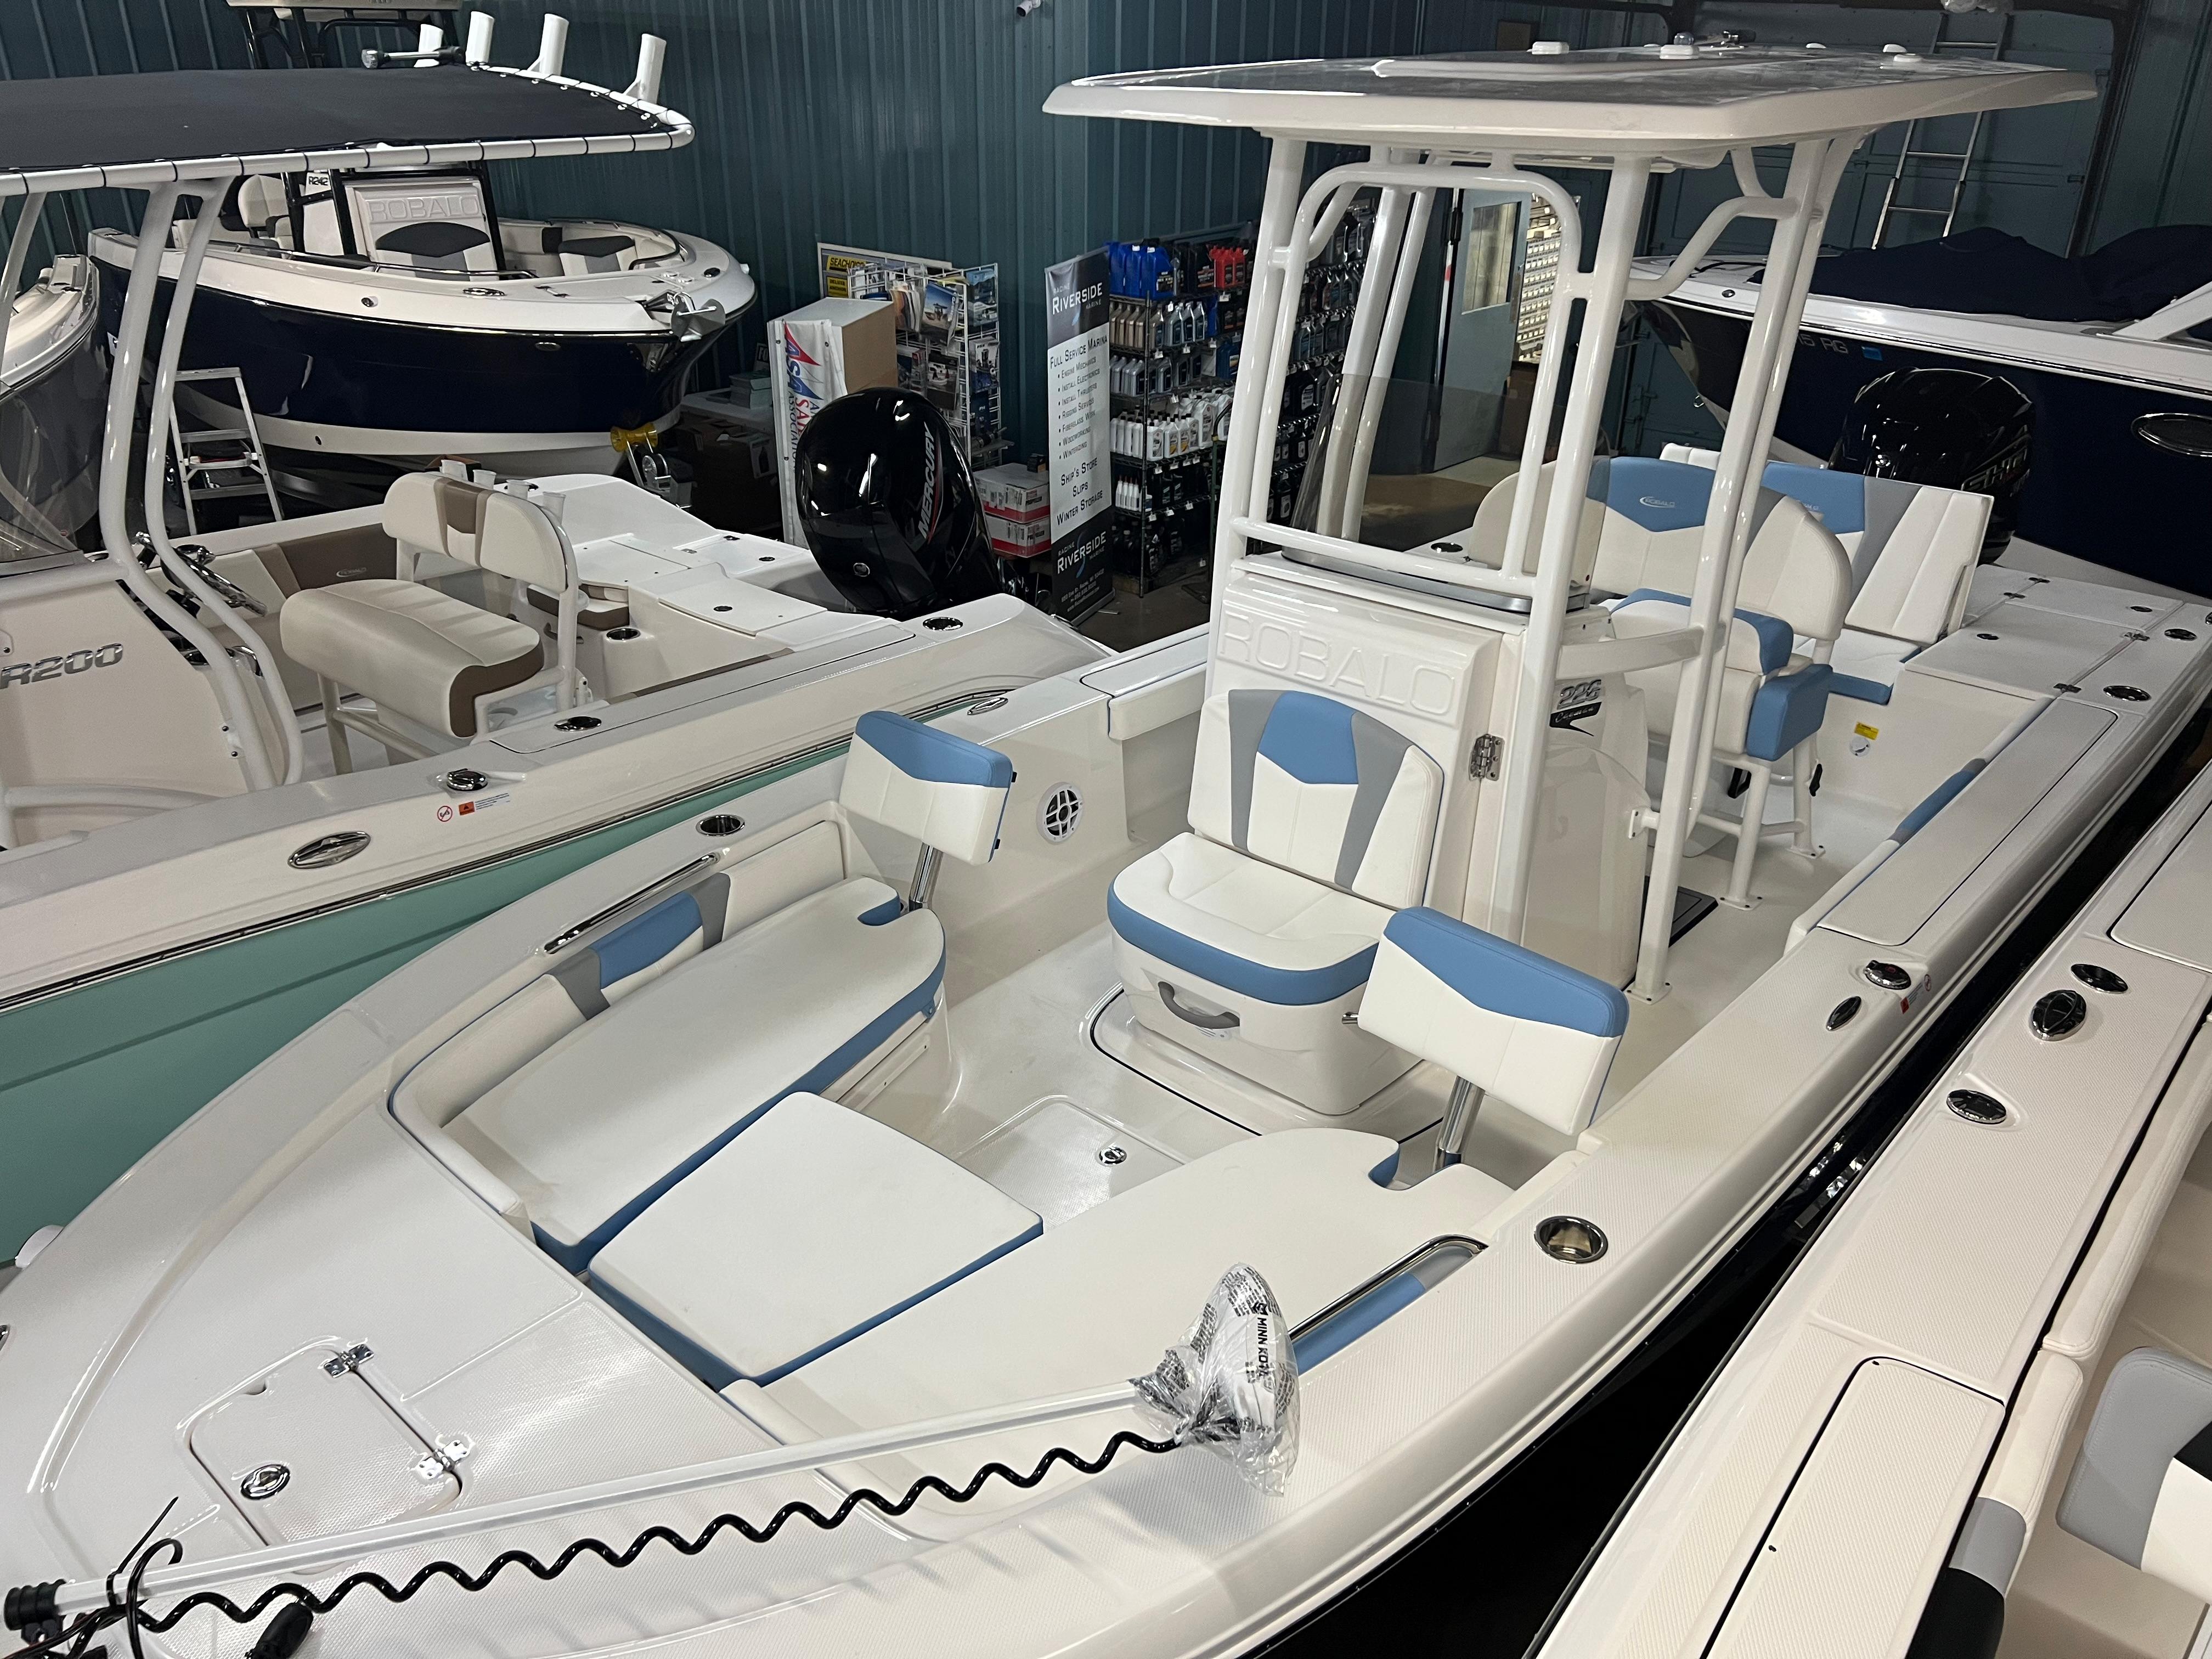 Robalo boats for sale